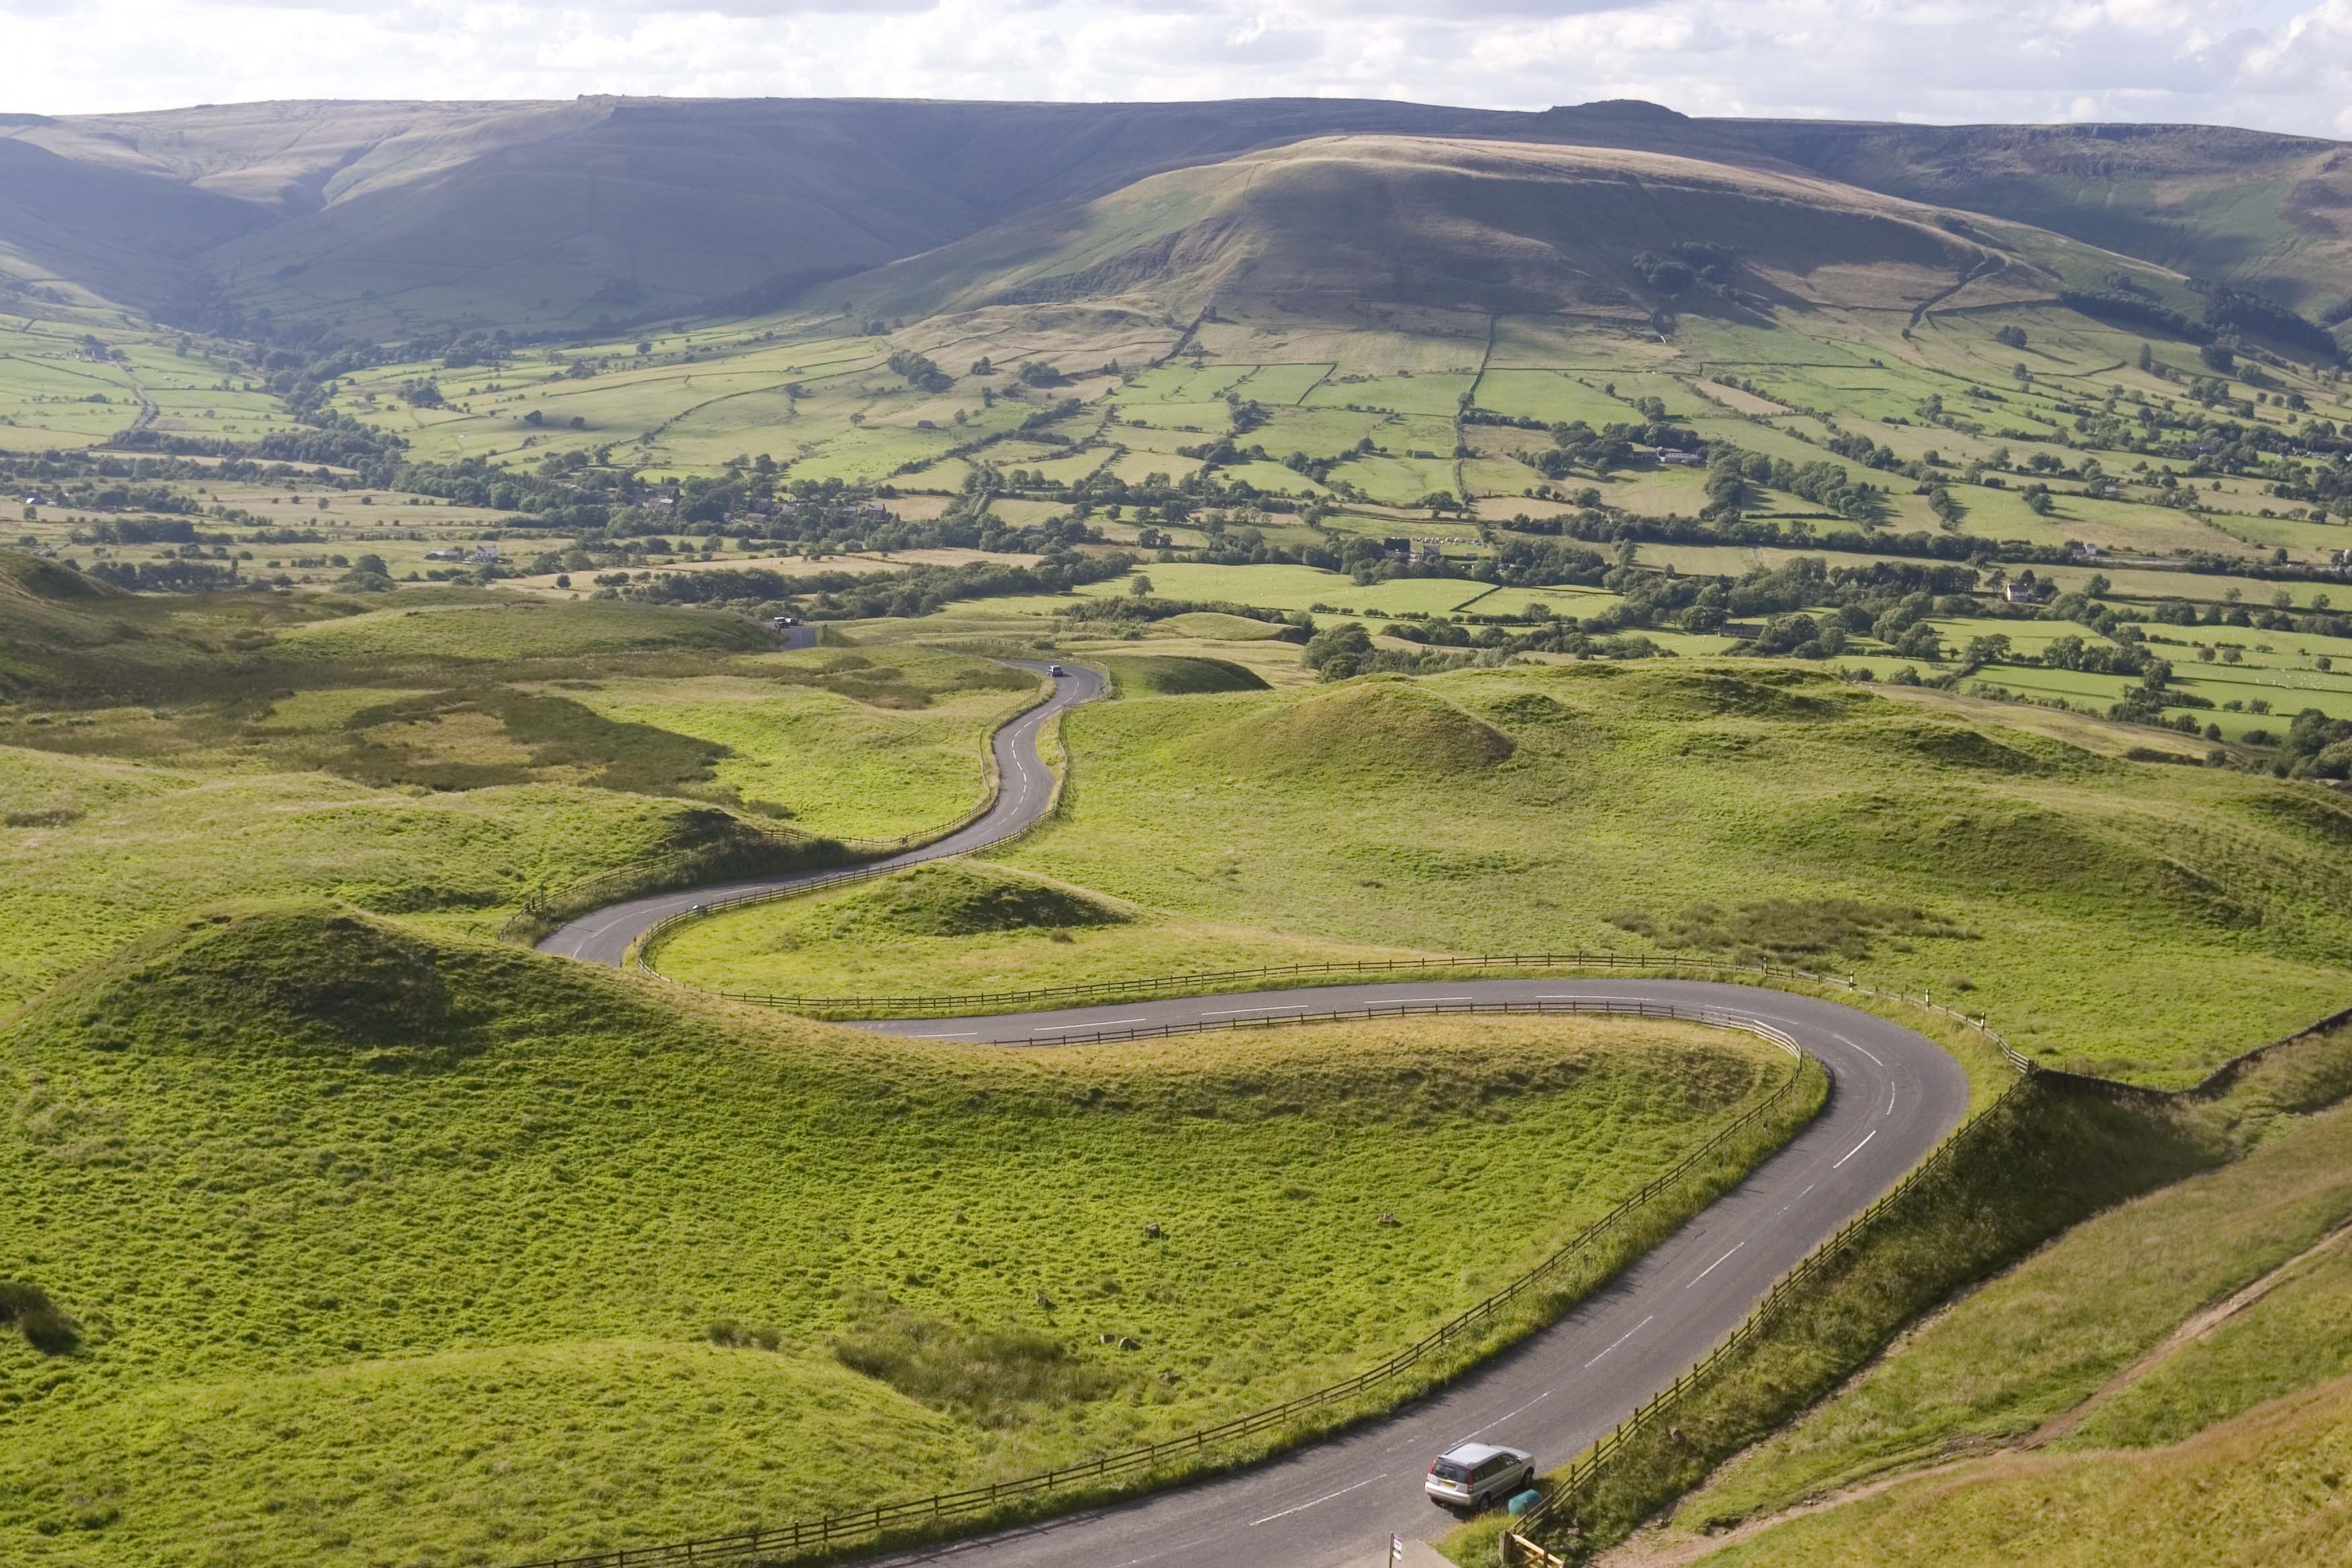 Beautiful drive on a scenic road in the contryside of England.